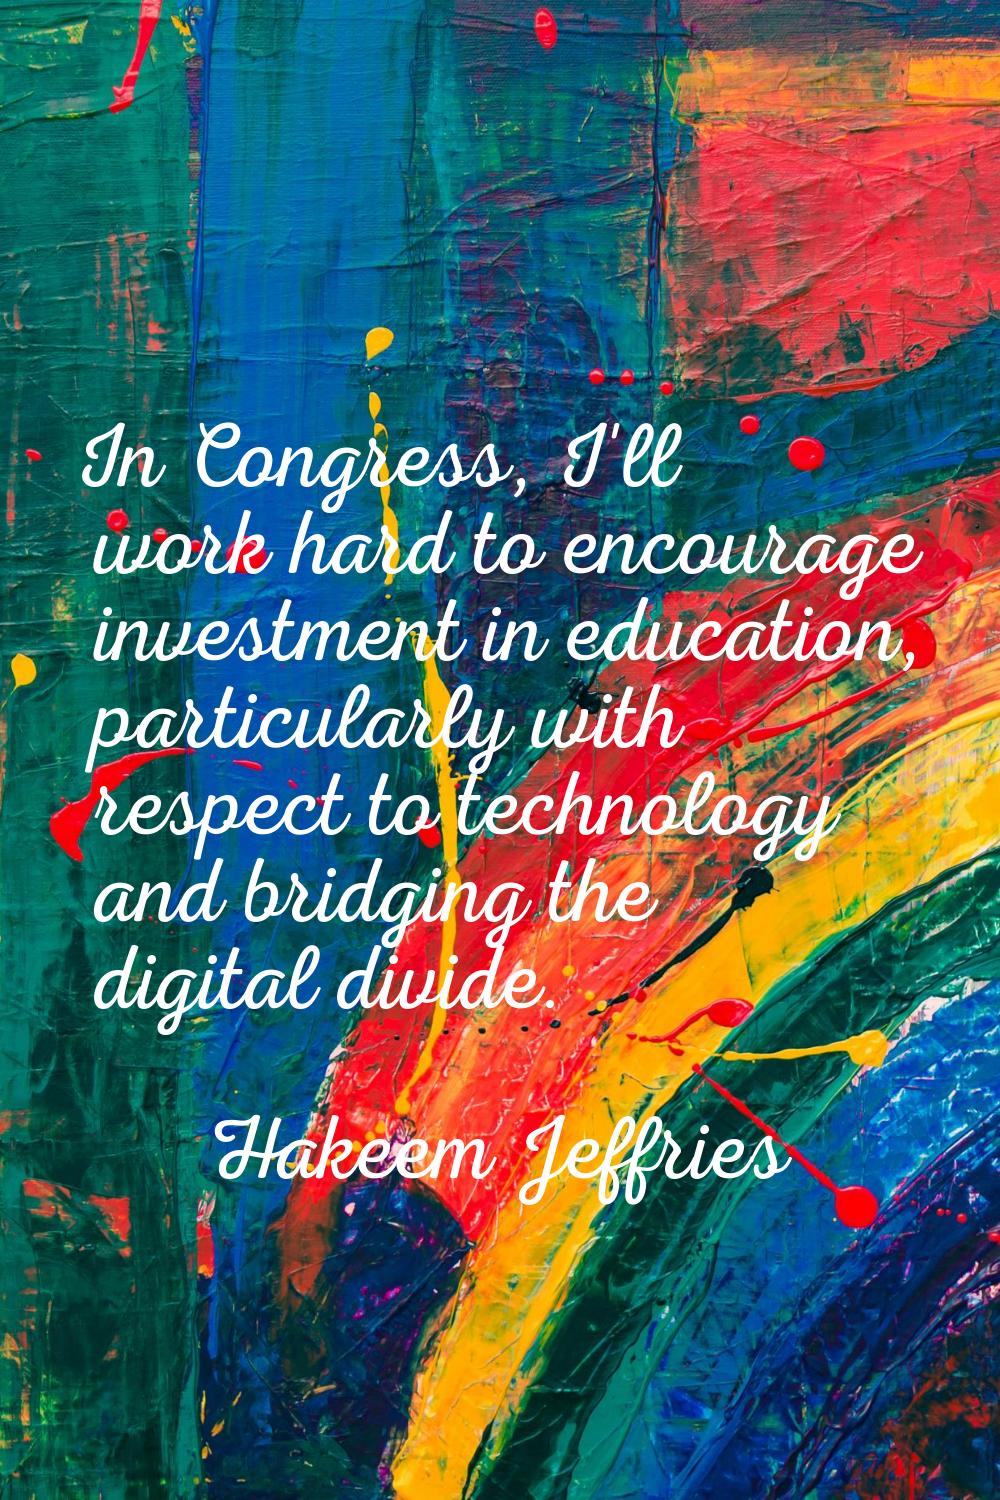 In Congress, I'll work hard to encourage investment in education, particularly with respect to tech